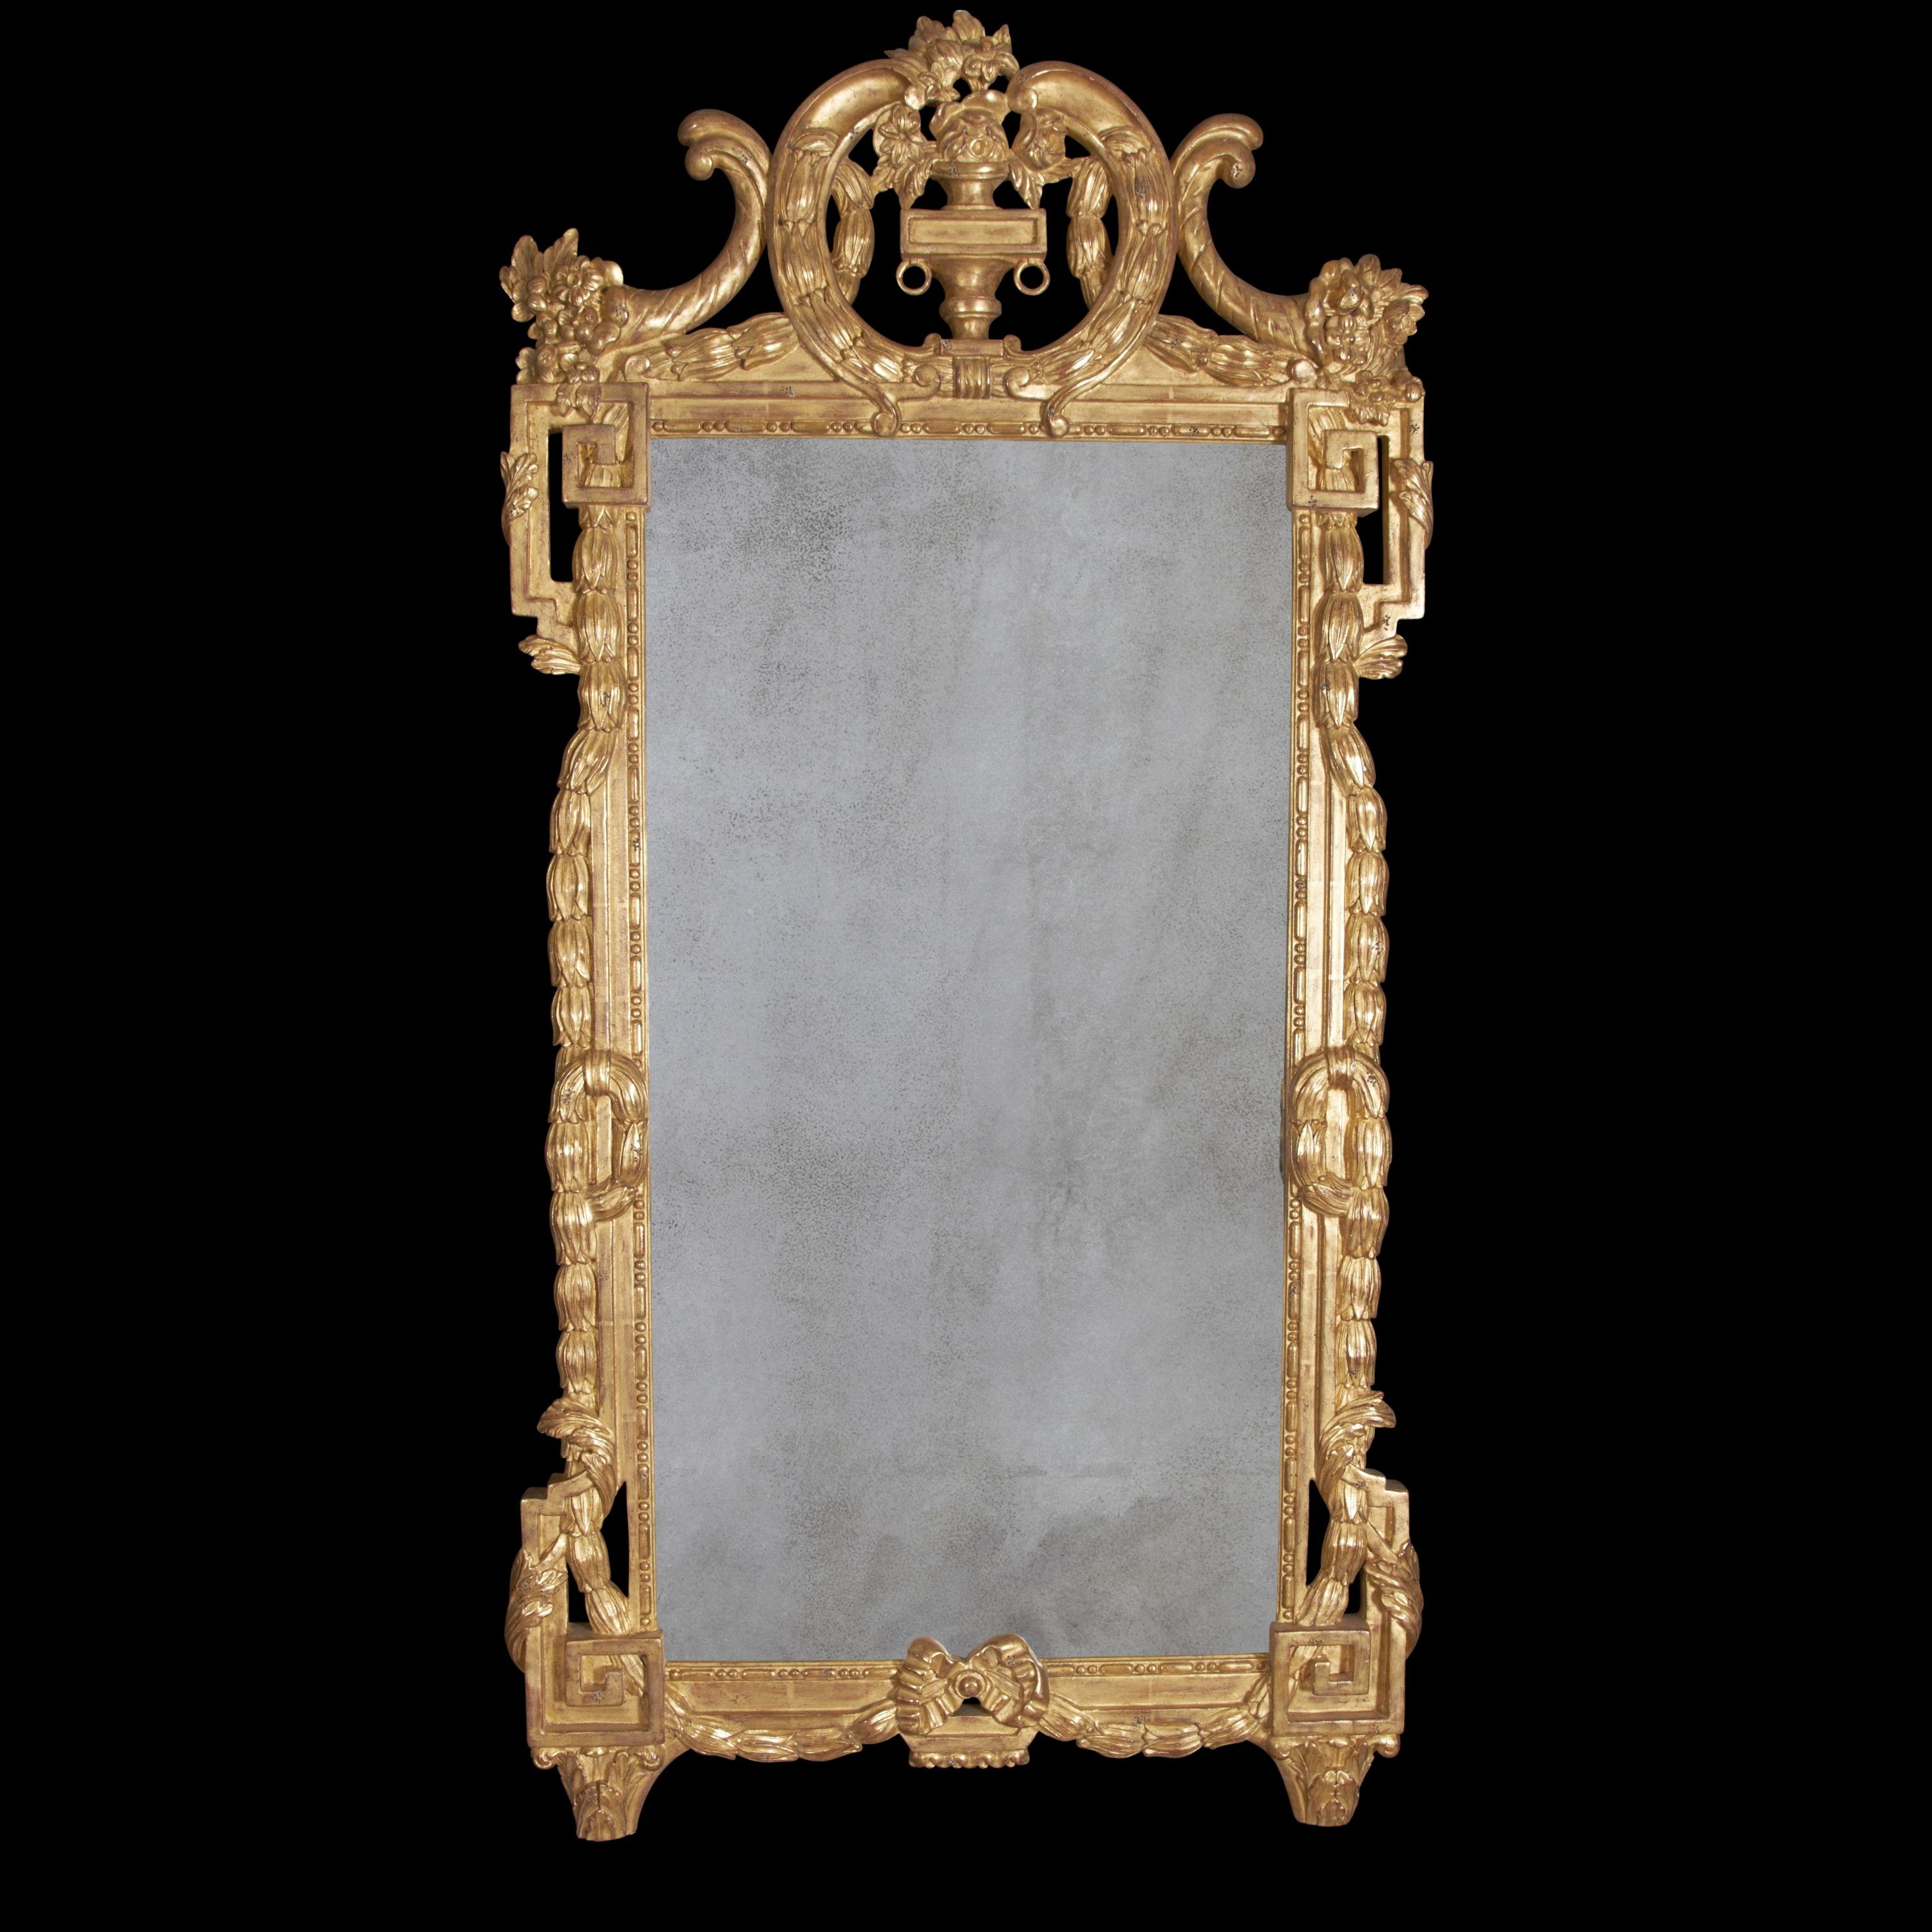 Home Decor Fascinating Antique Mirror Images Design Inspirations Regarding Old Fashioned Mirrors For Sale (View 13 of 15)